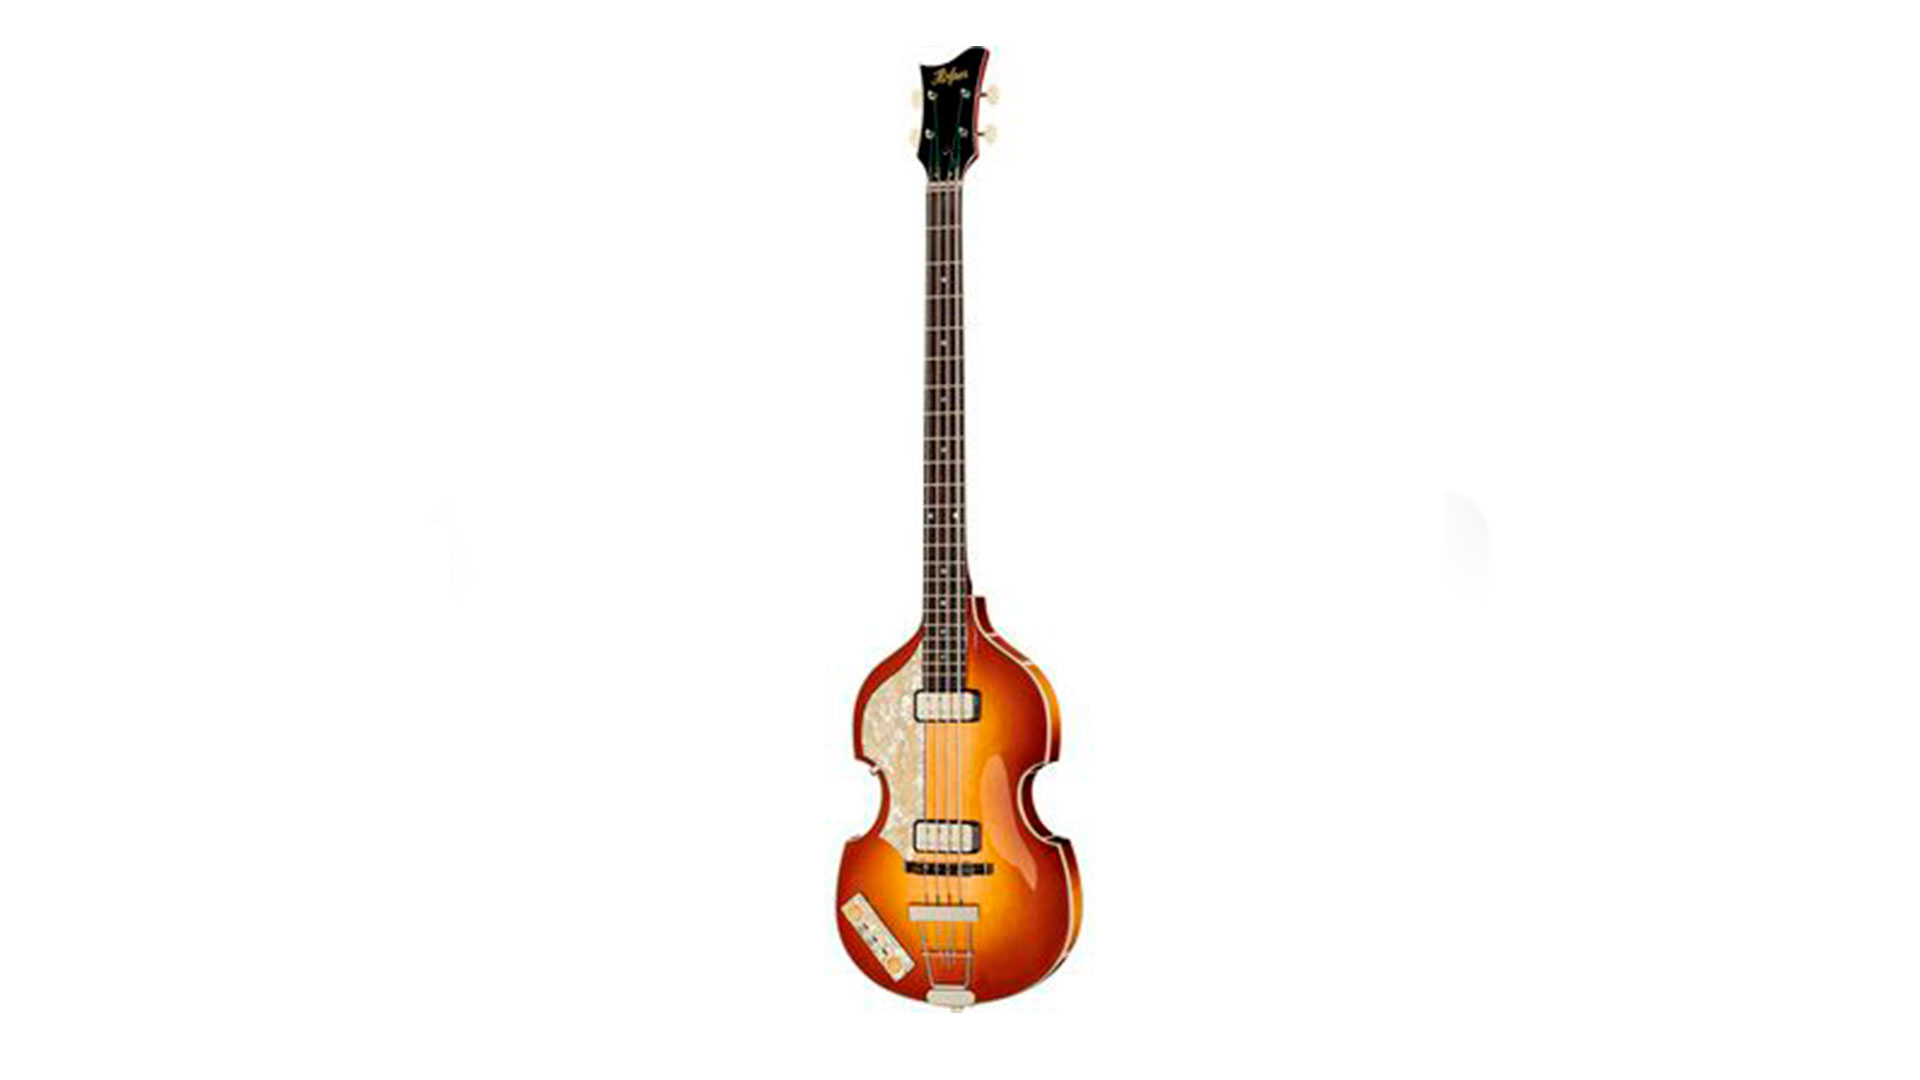 Top Lefthanded Semi-Acoustic Basses